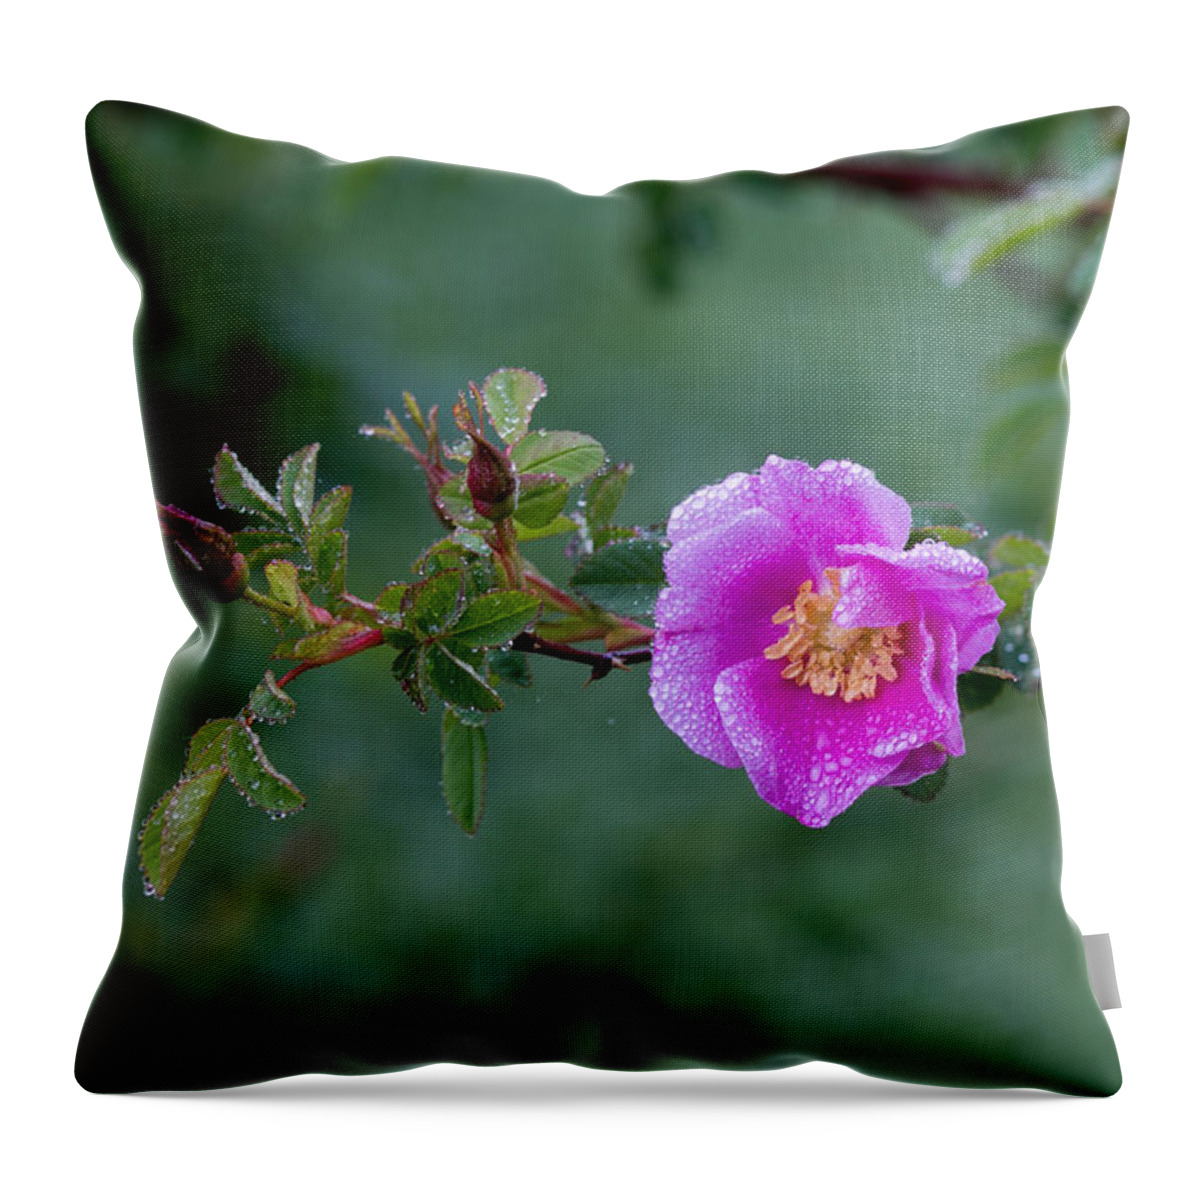 Rose; Floral; Blossoms; Bloom; Roses; Pink Rose; Pink Flowers; Flower; Morning Dew; Water Drops; Moisture; Throw Pillow featuring the photograph Morning Dew on Pink Rose by E Faithe Lester